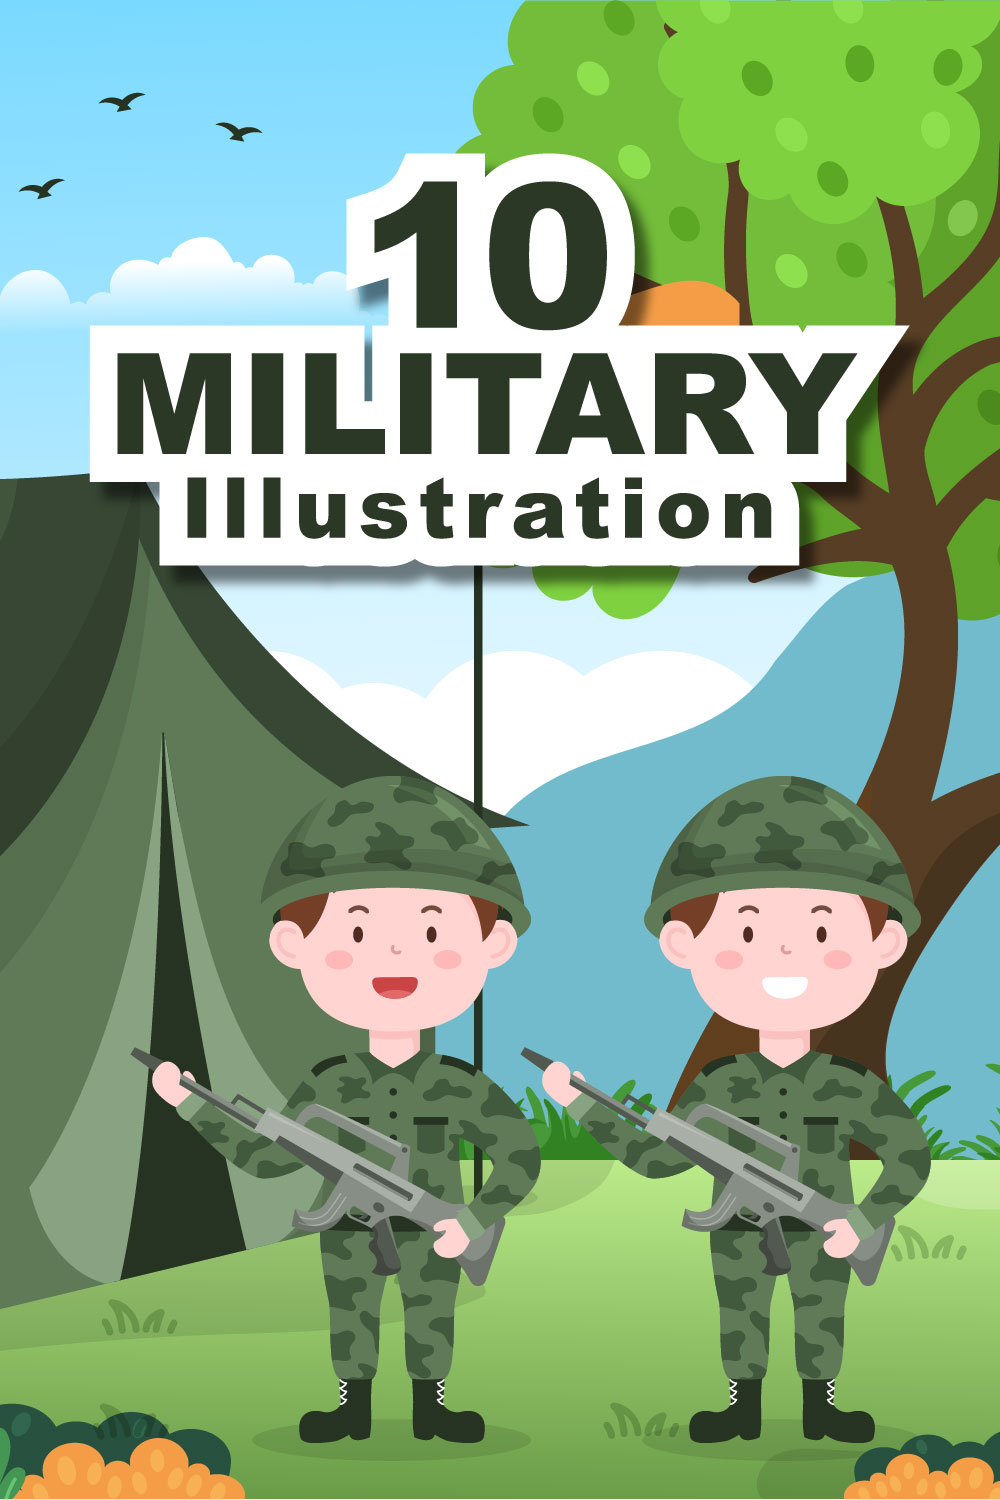 10 Military Army Force Illustration pinterest image.